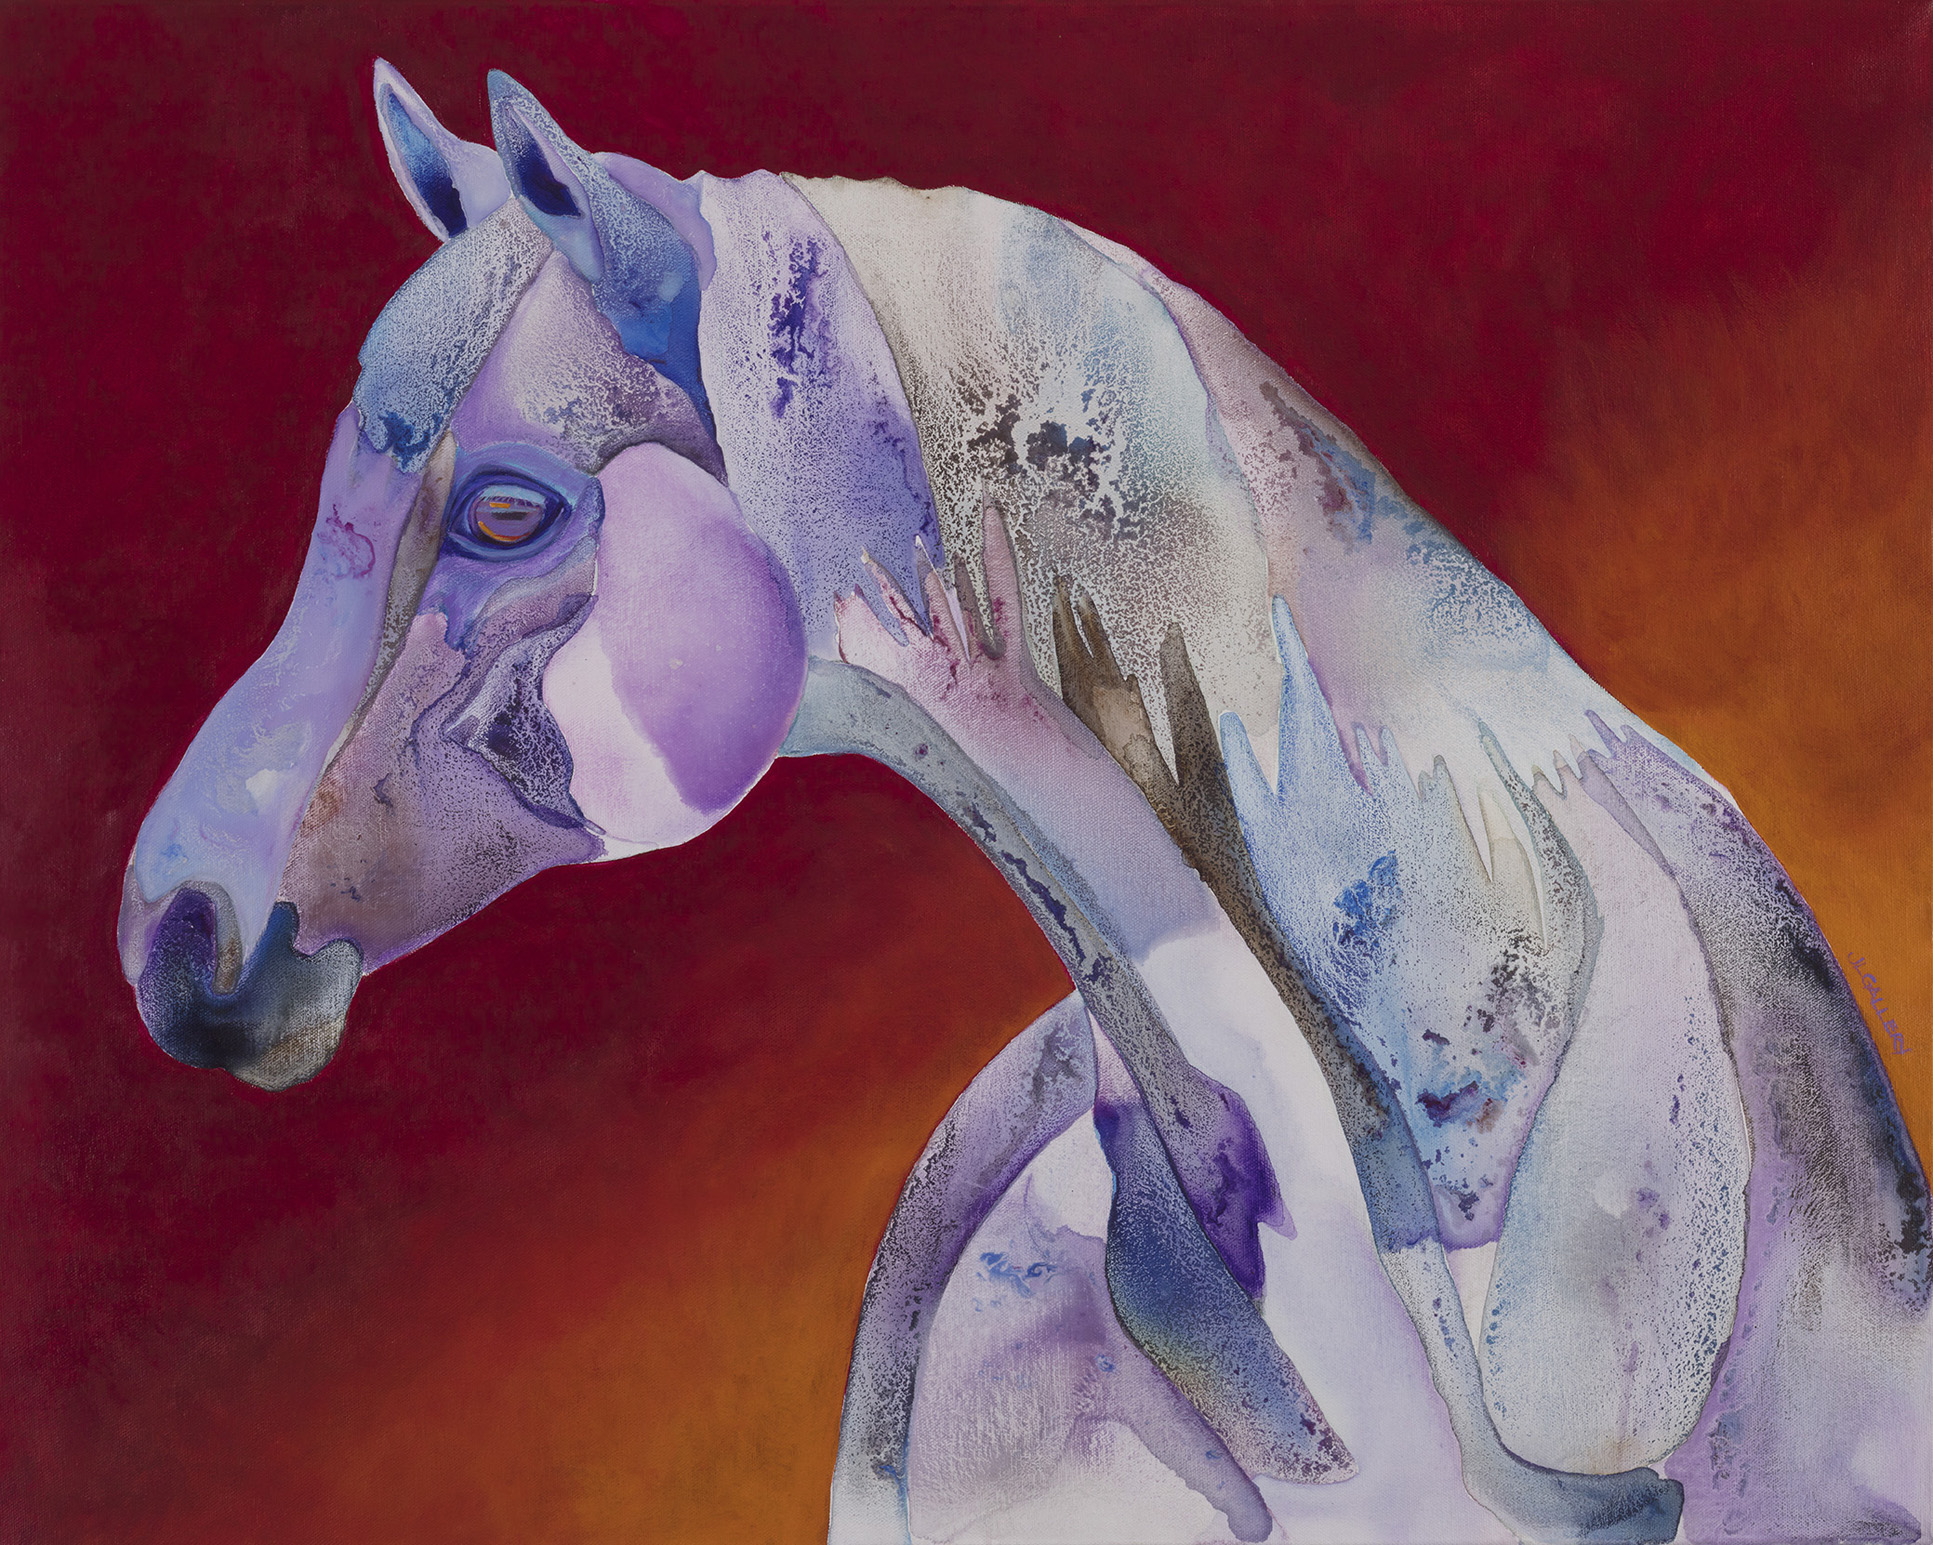 Twilight is a painting of a 24x30" acrylic painting of a purple Arabian horse using a watercolor technique. Red background.